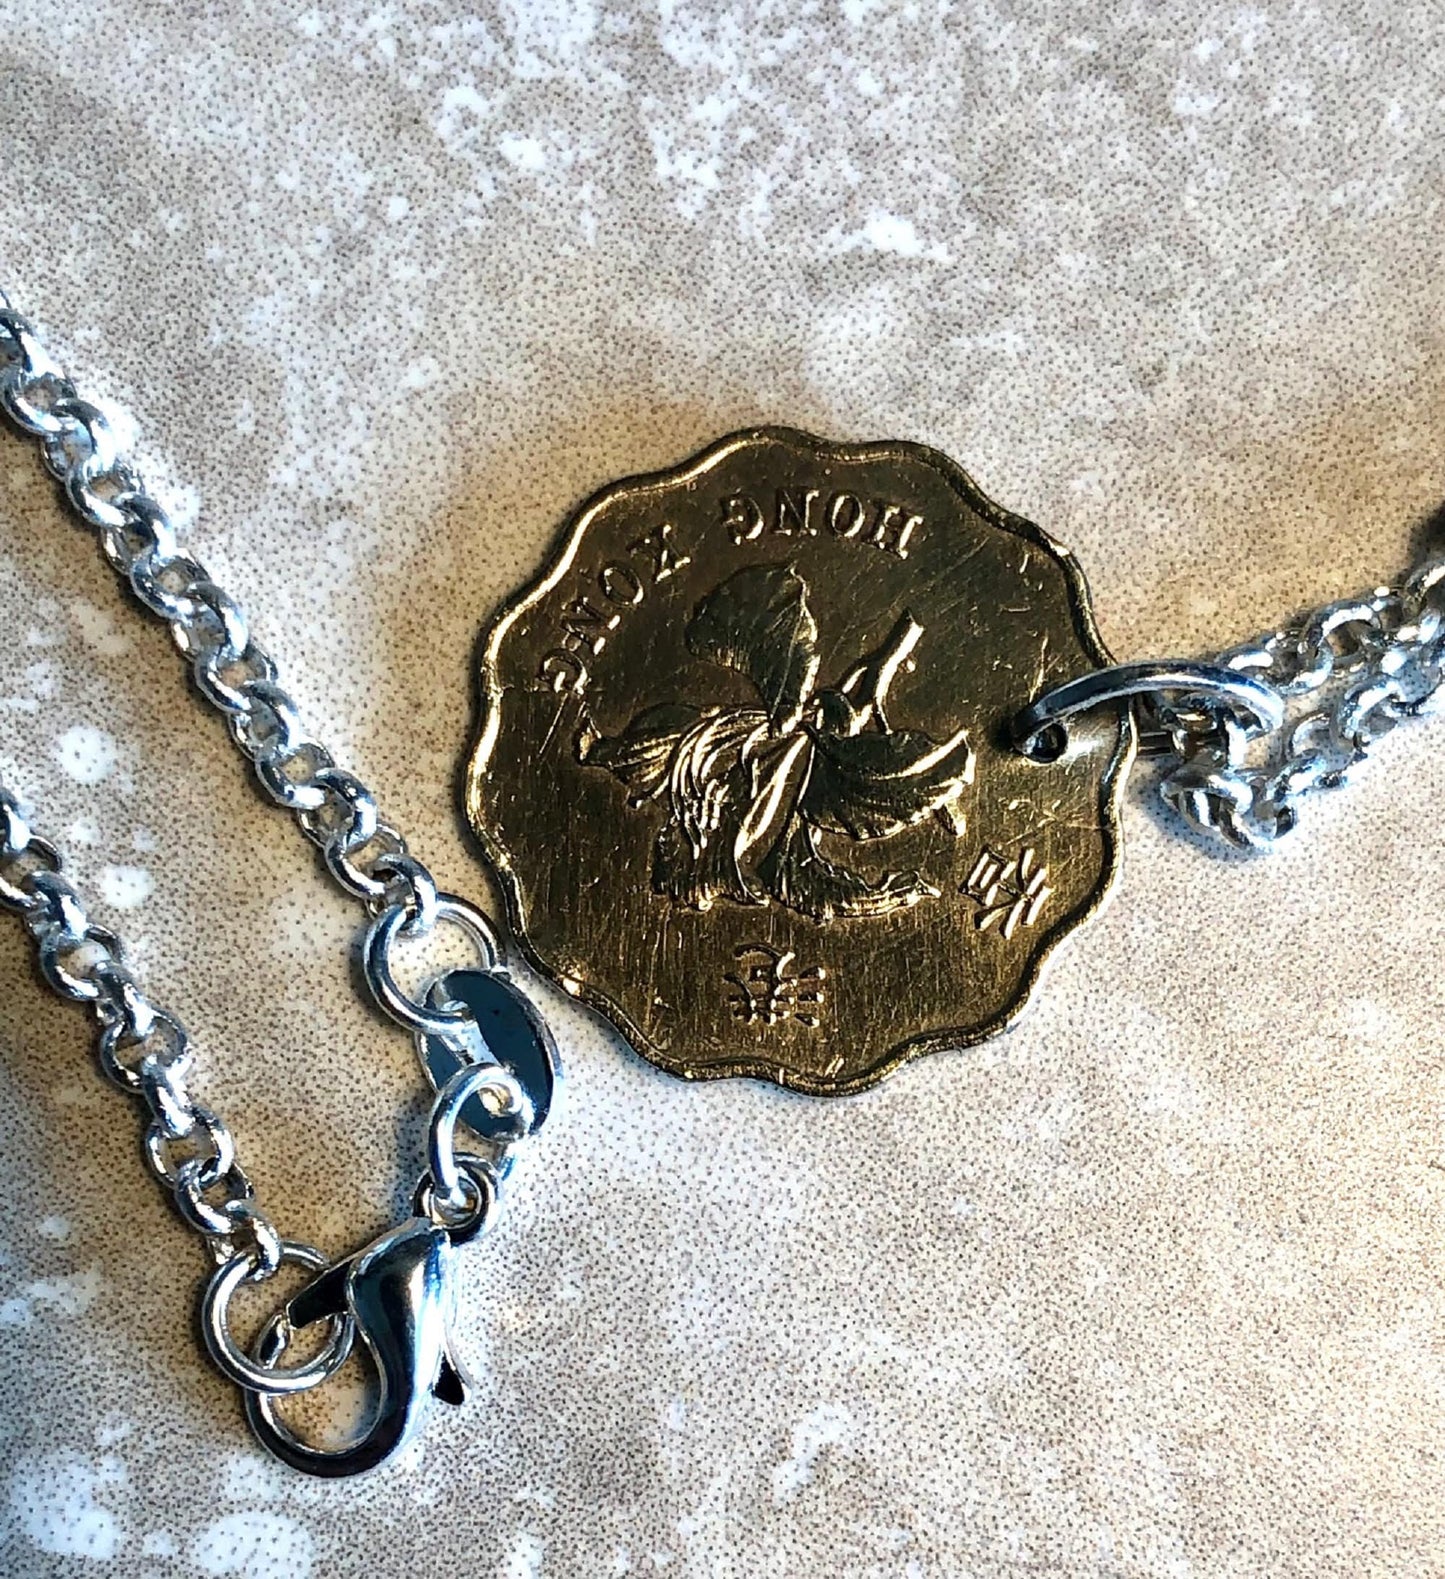 Hong Kong Pendant Coin Necklace 20 Cents China Chinese Custom Made Vintage and Rare coins - Coin Enthusiast - Fashion Gift Accessory.